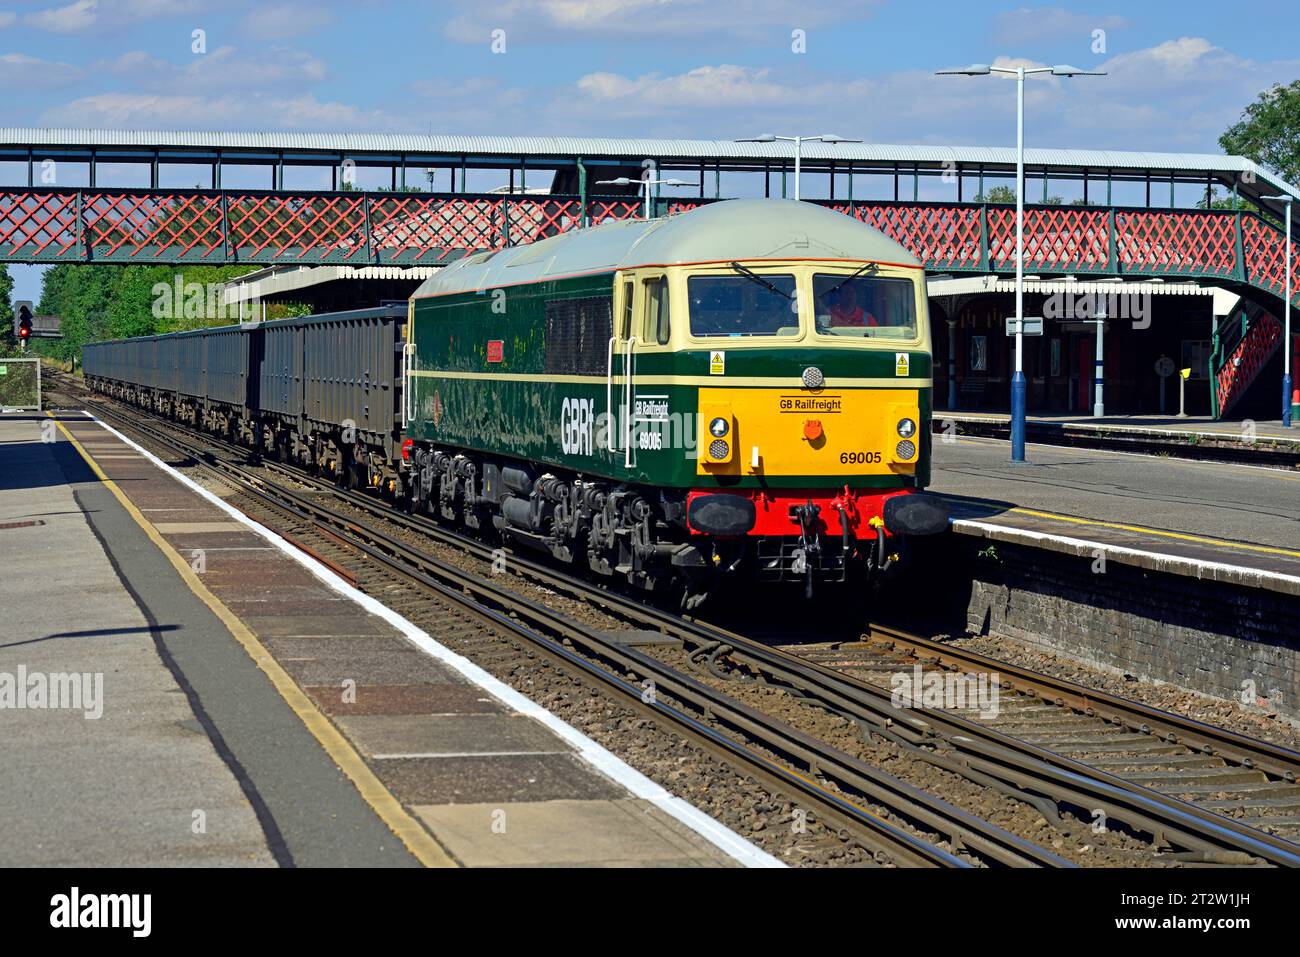 GBRf Class 69 Co-Co diesel electric locomotive No. 69005 'Eastleigh' is seen passing through St Denys station en-route to Southampton Western Docks. Stock Photo